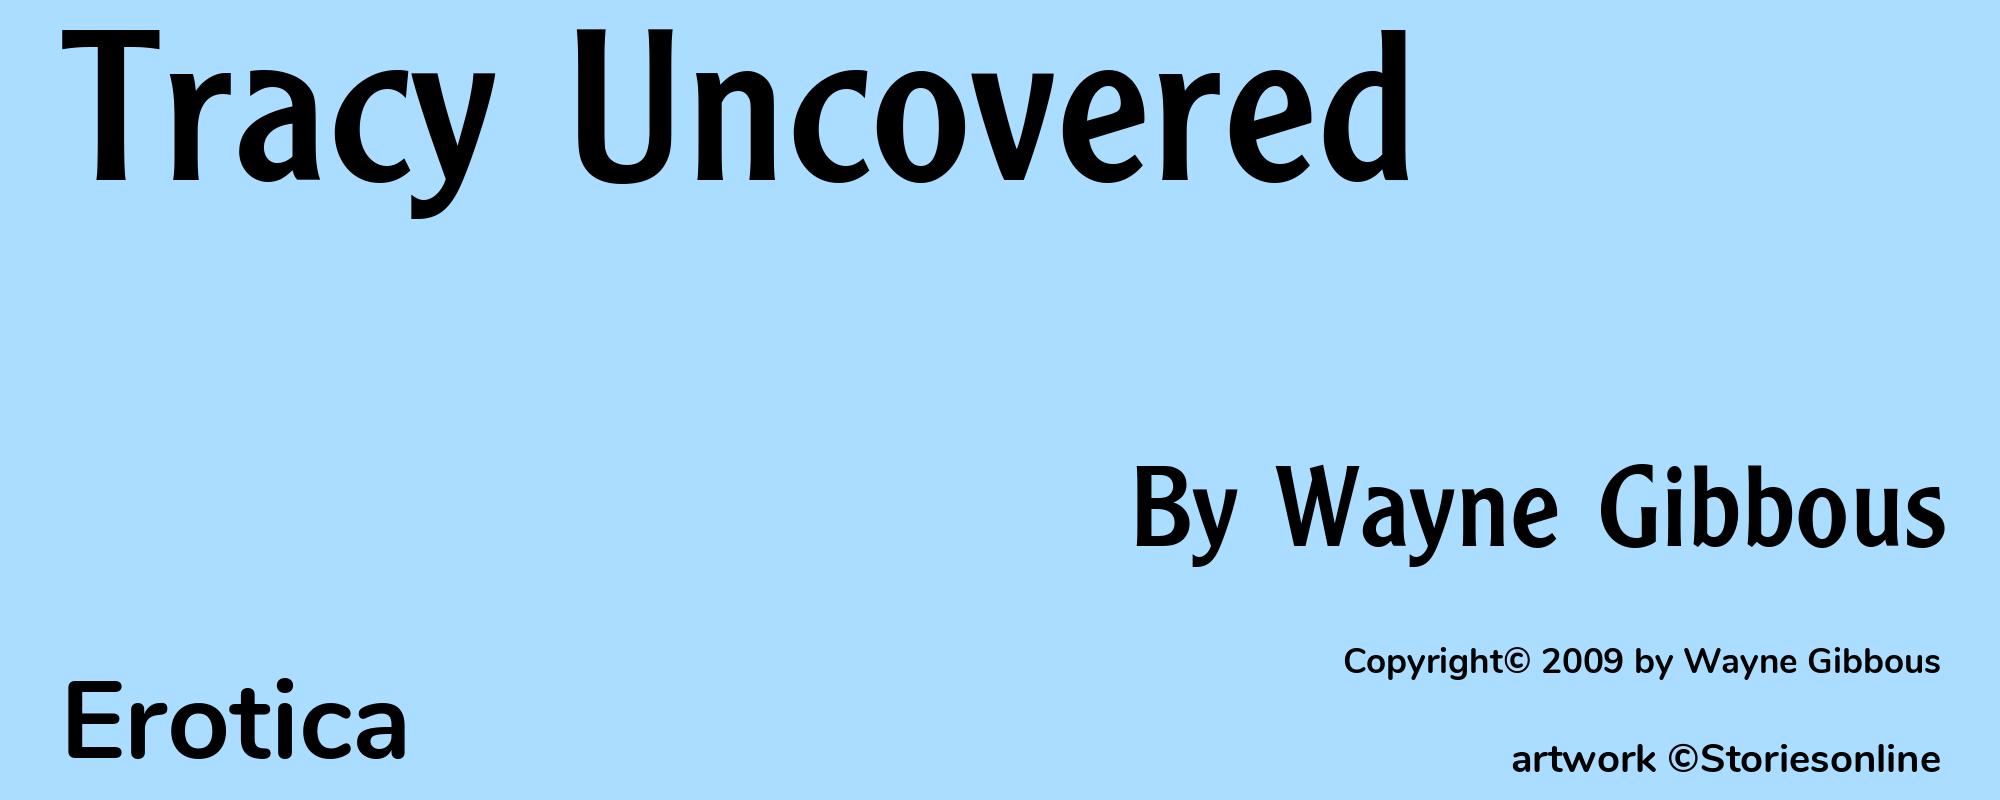 Tracy Uncovered - Cover